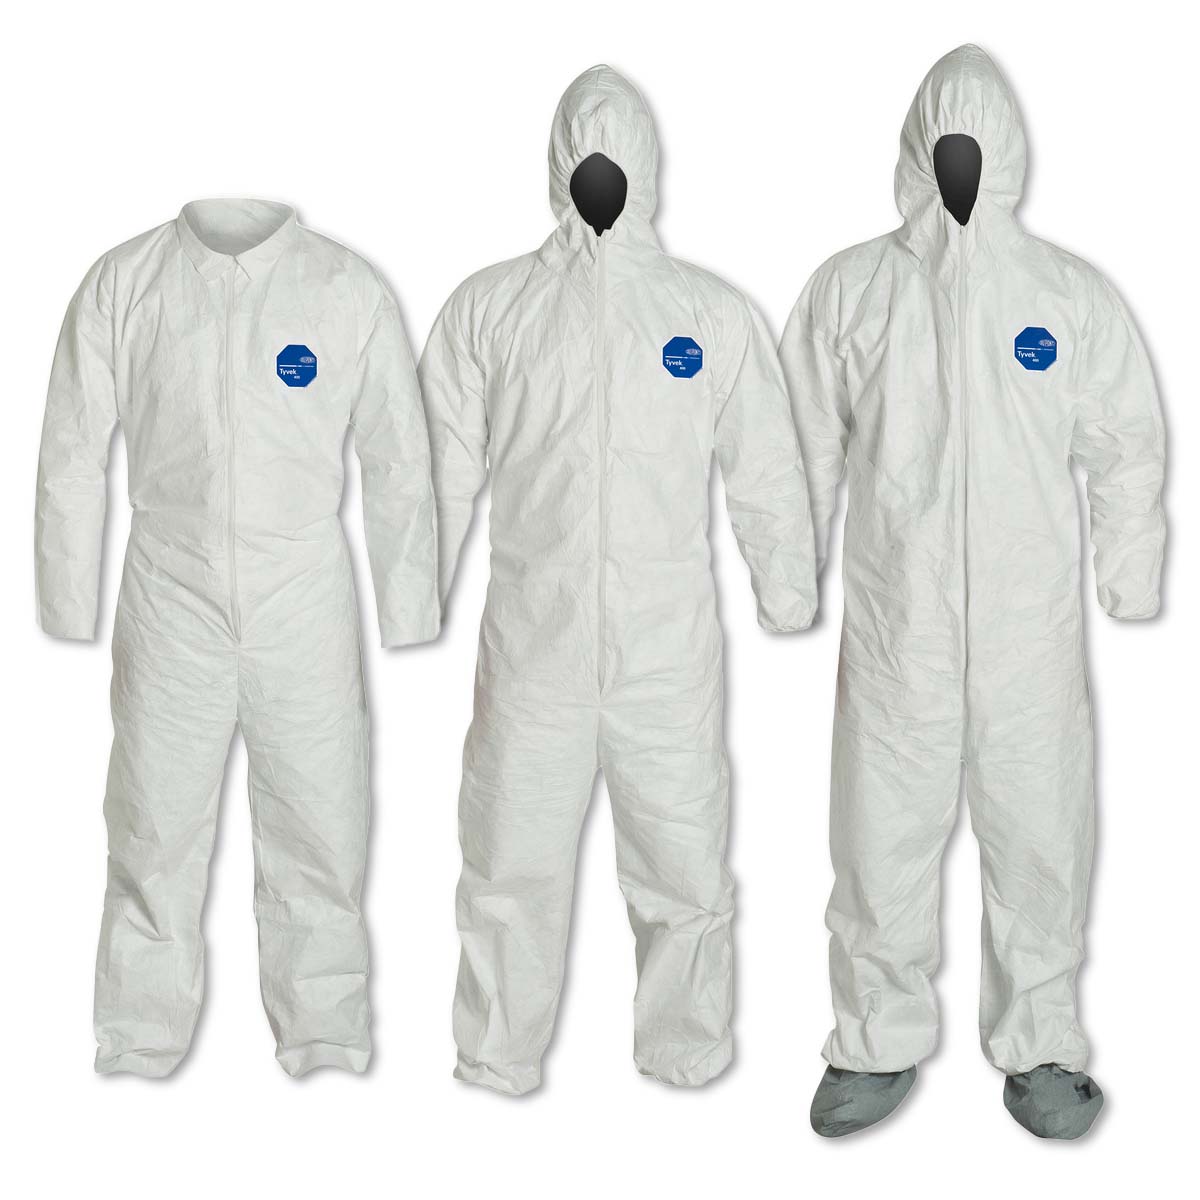  DuPont™ White Tyvek® 400 Disposable Coveralls Work Safety Protective Gear